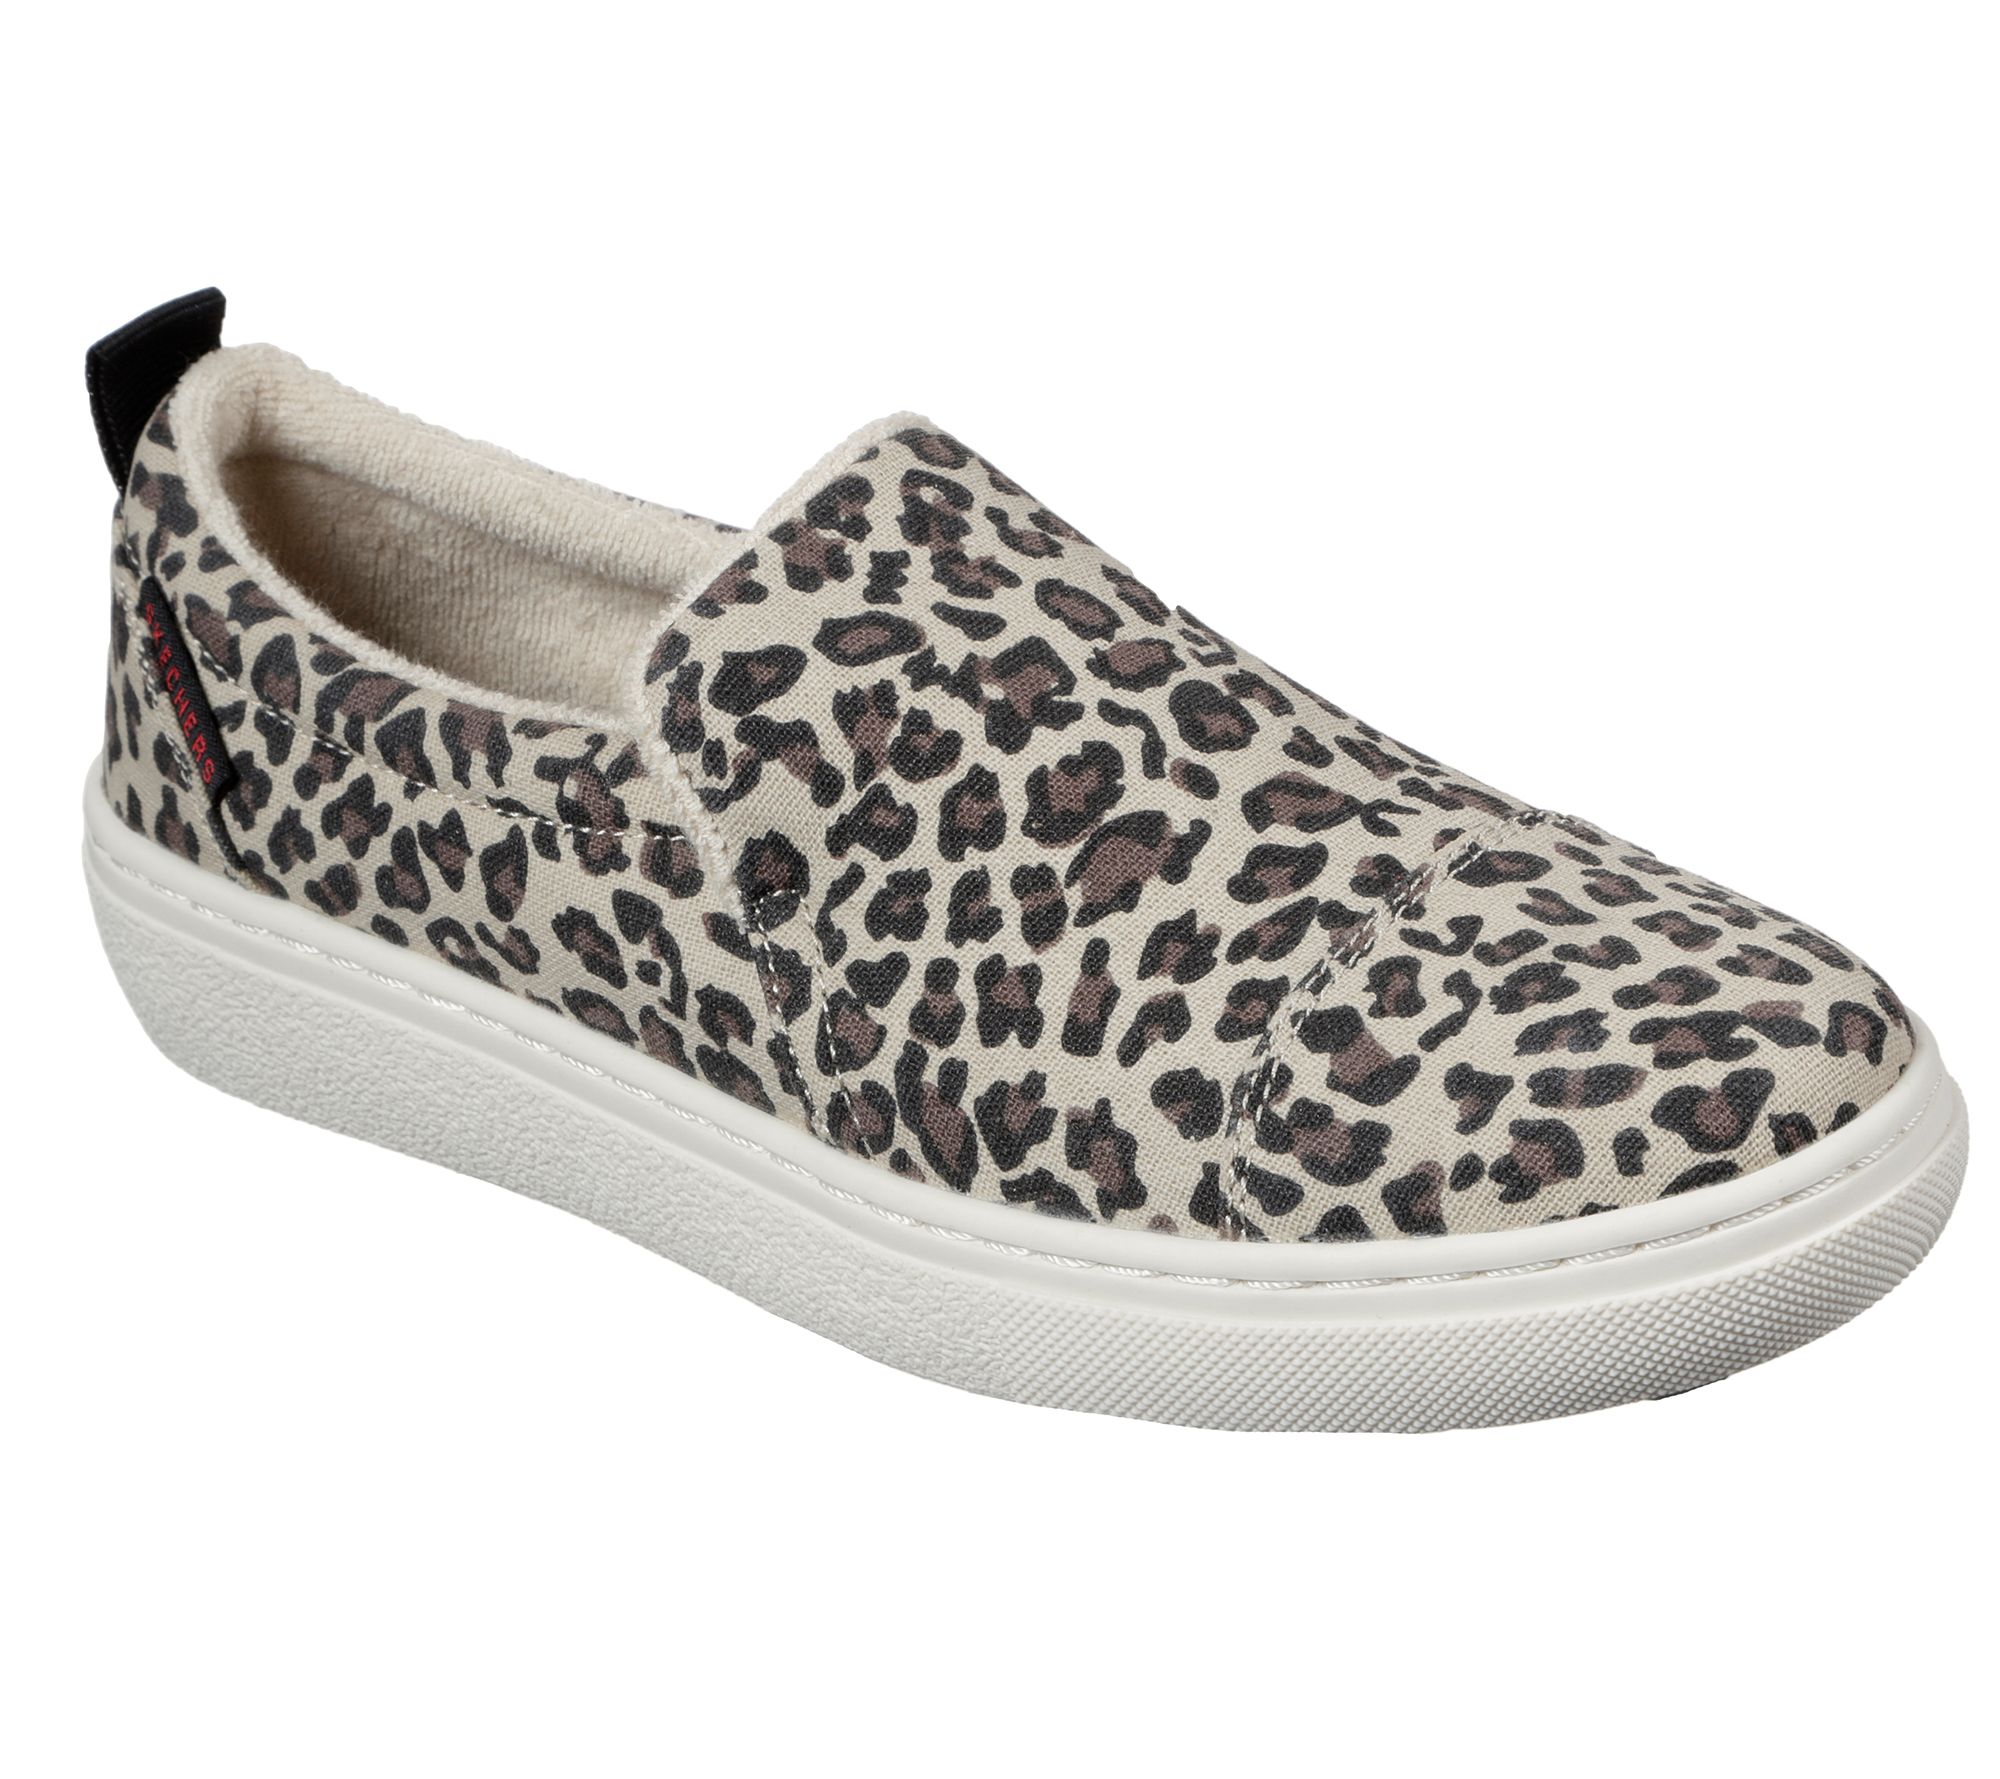 Skechers Goldie Slip-On Shoes - Playful 